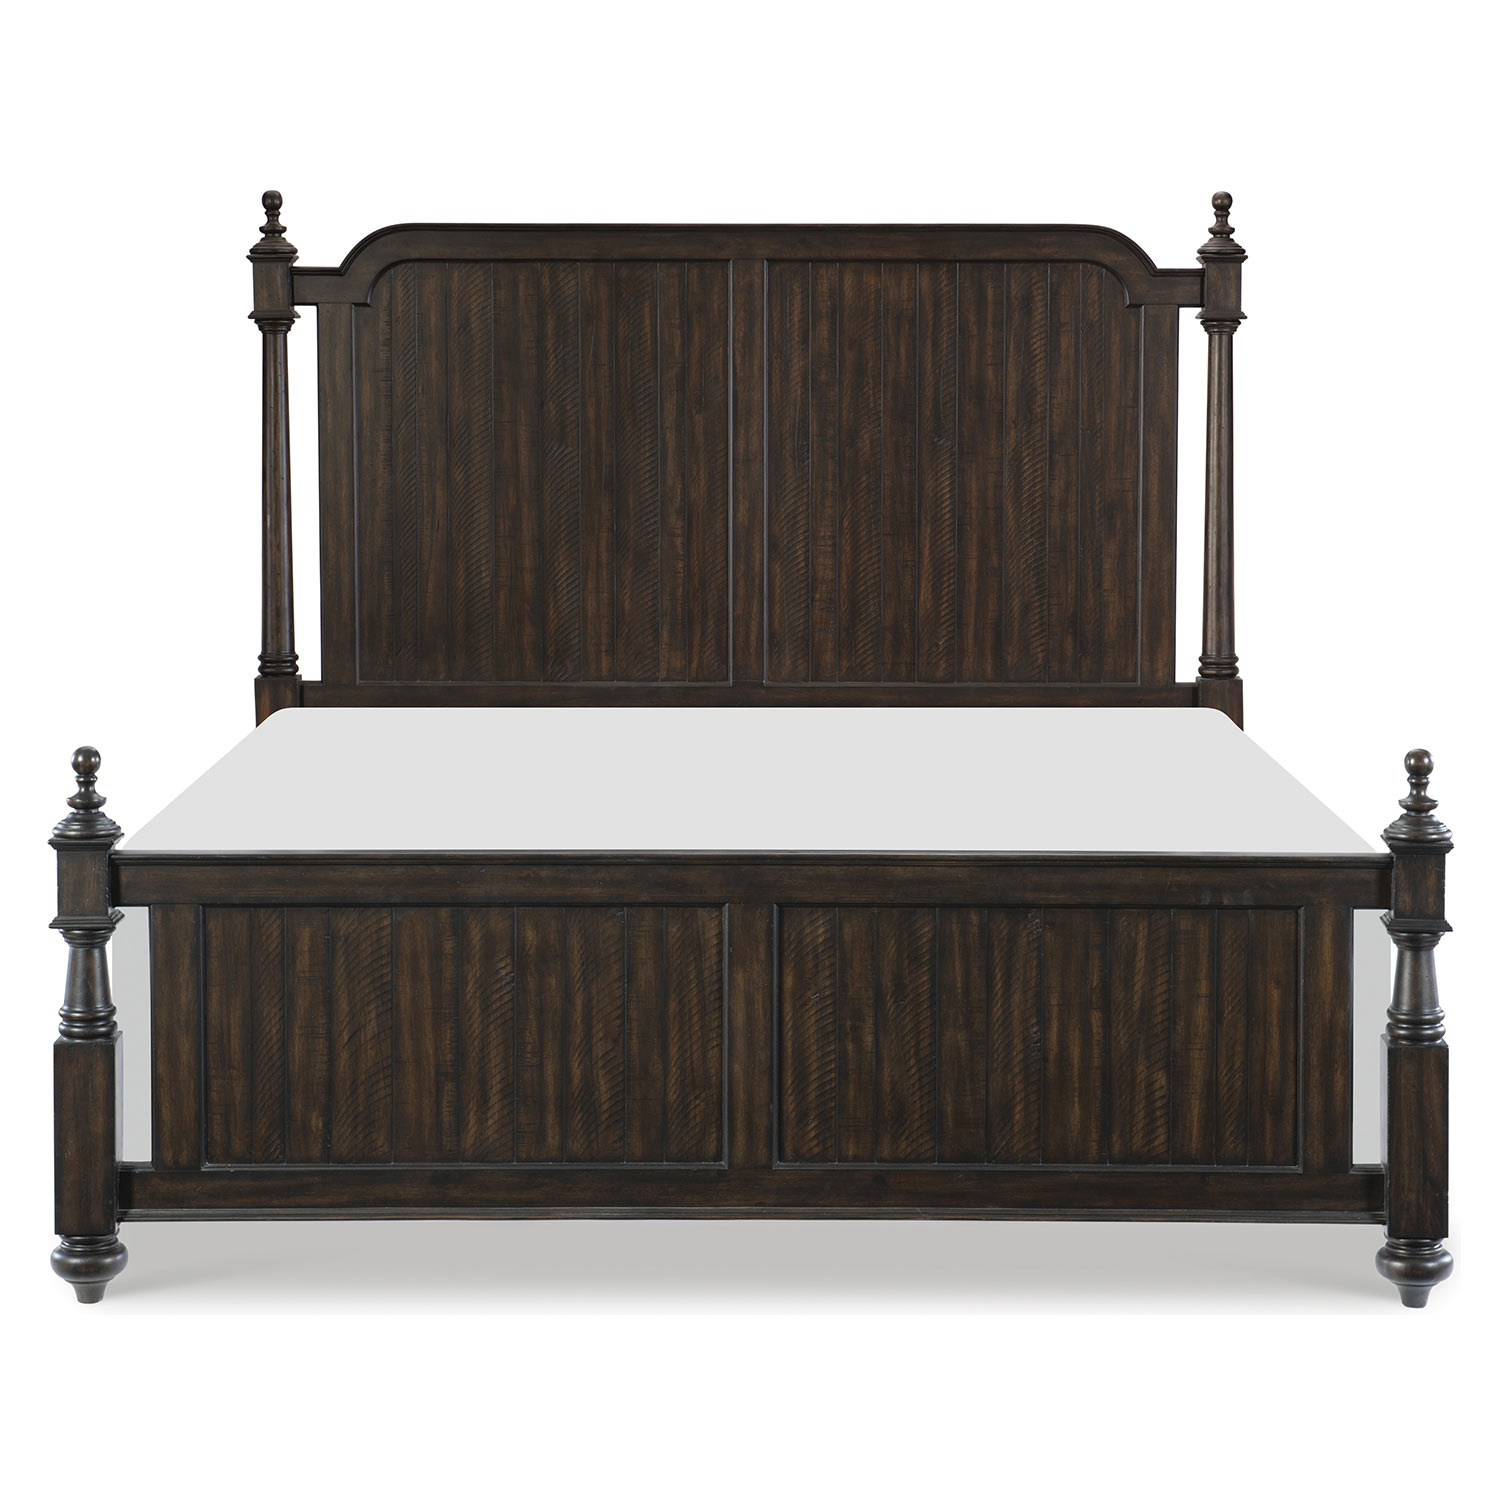 Homelegance Cardano Low-post bed - Driftwood Charcoal